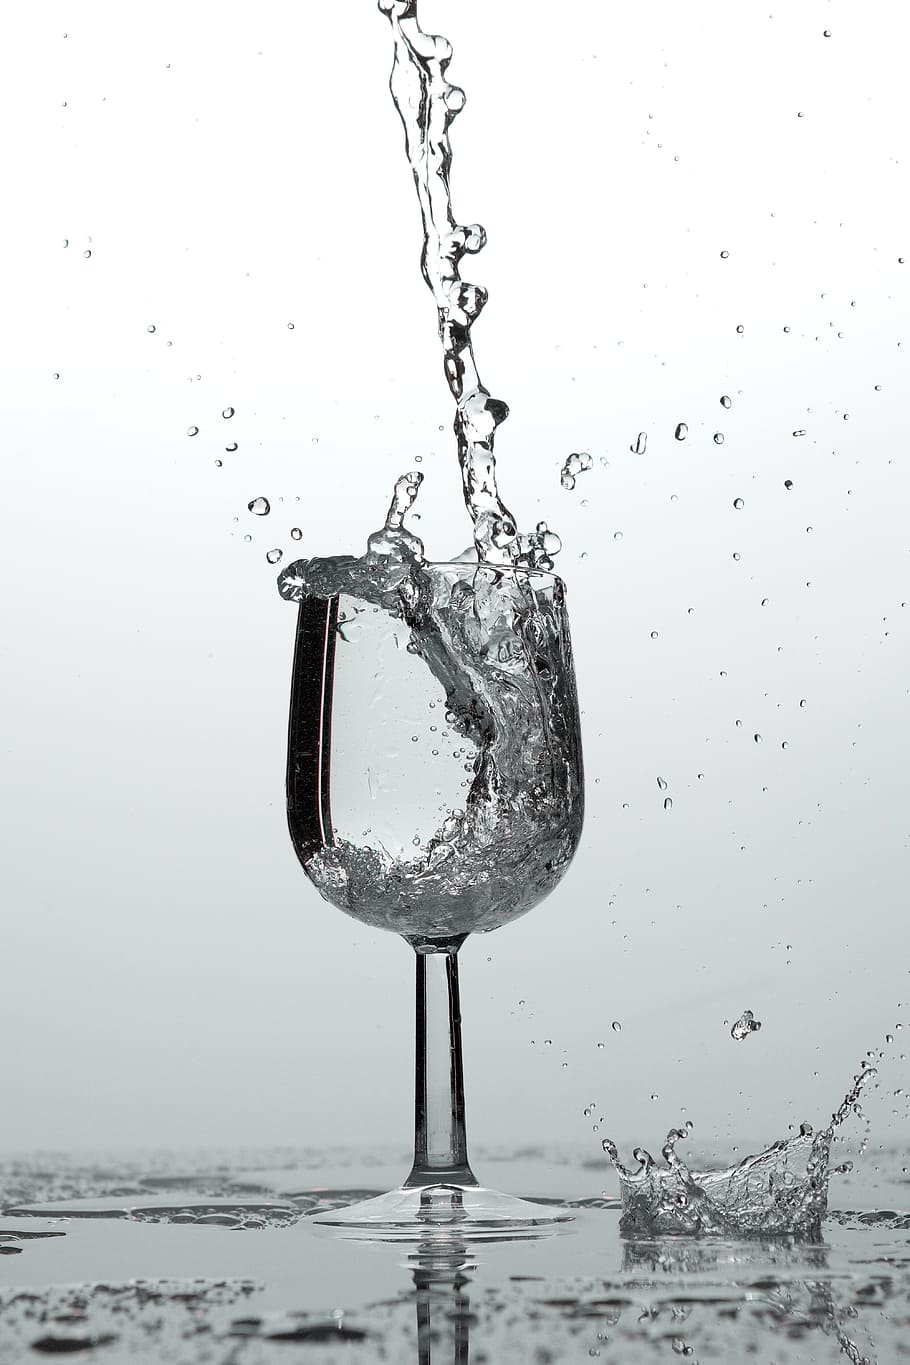 water, poured, goblet, glass, drink, drip, water glass, mood, reflection, ze